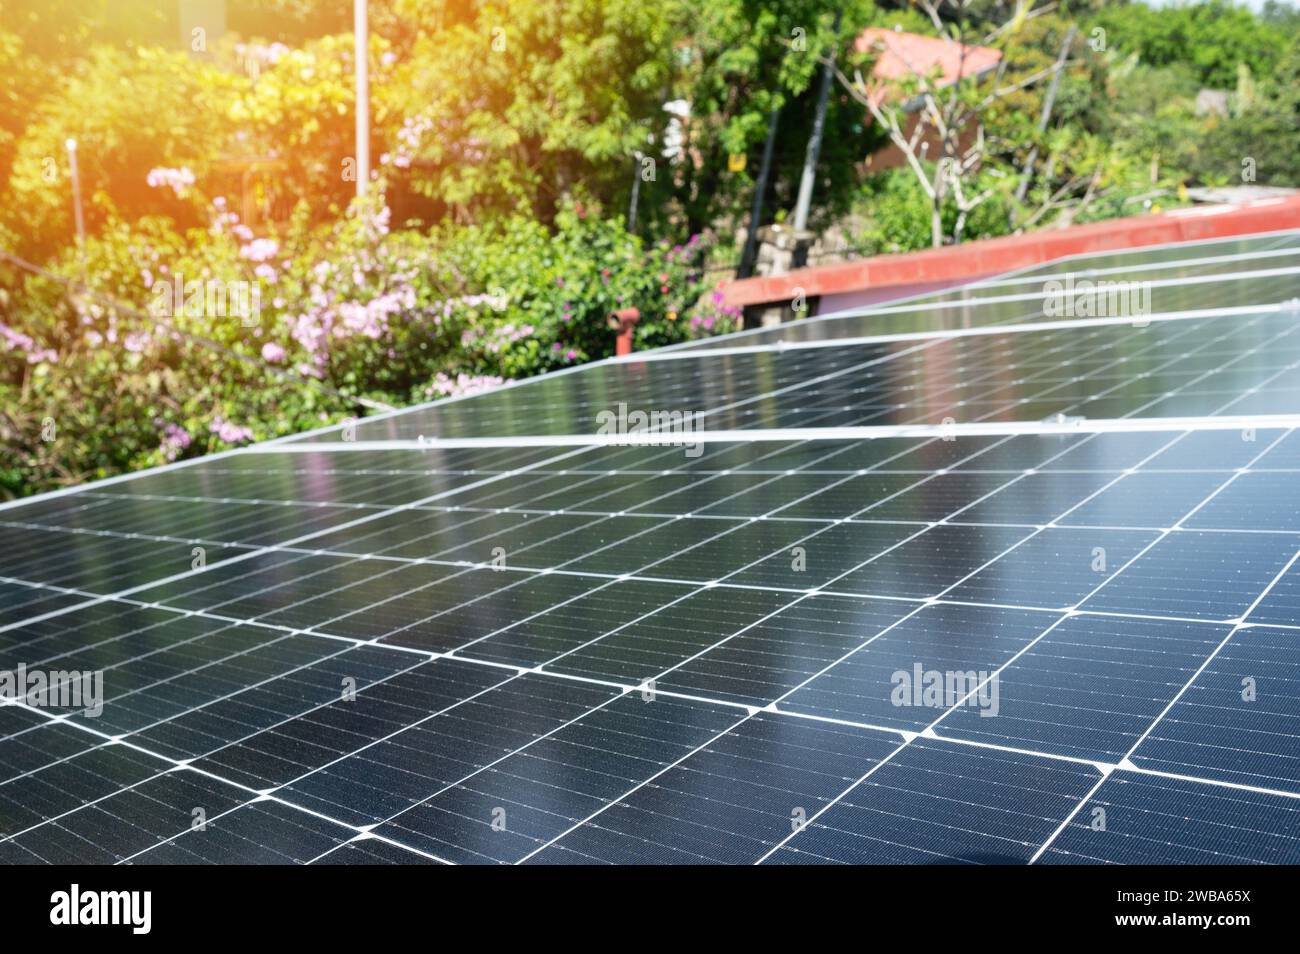 Solar electricity back up system on house roof in green garden background Stock Photo